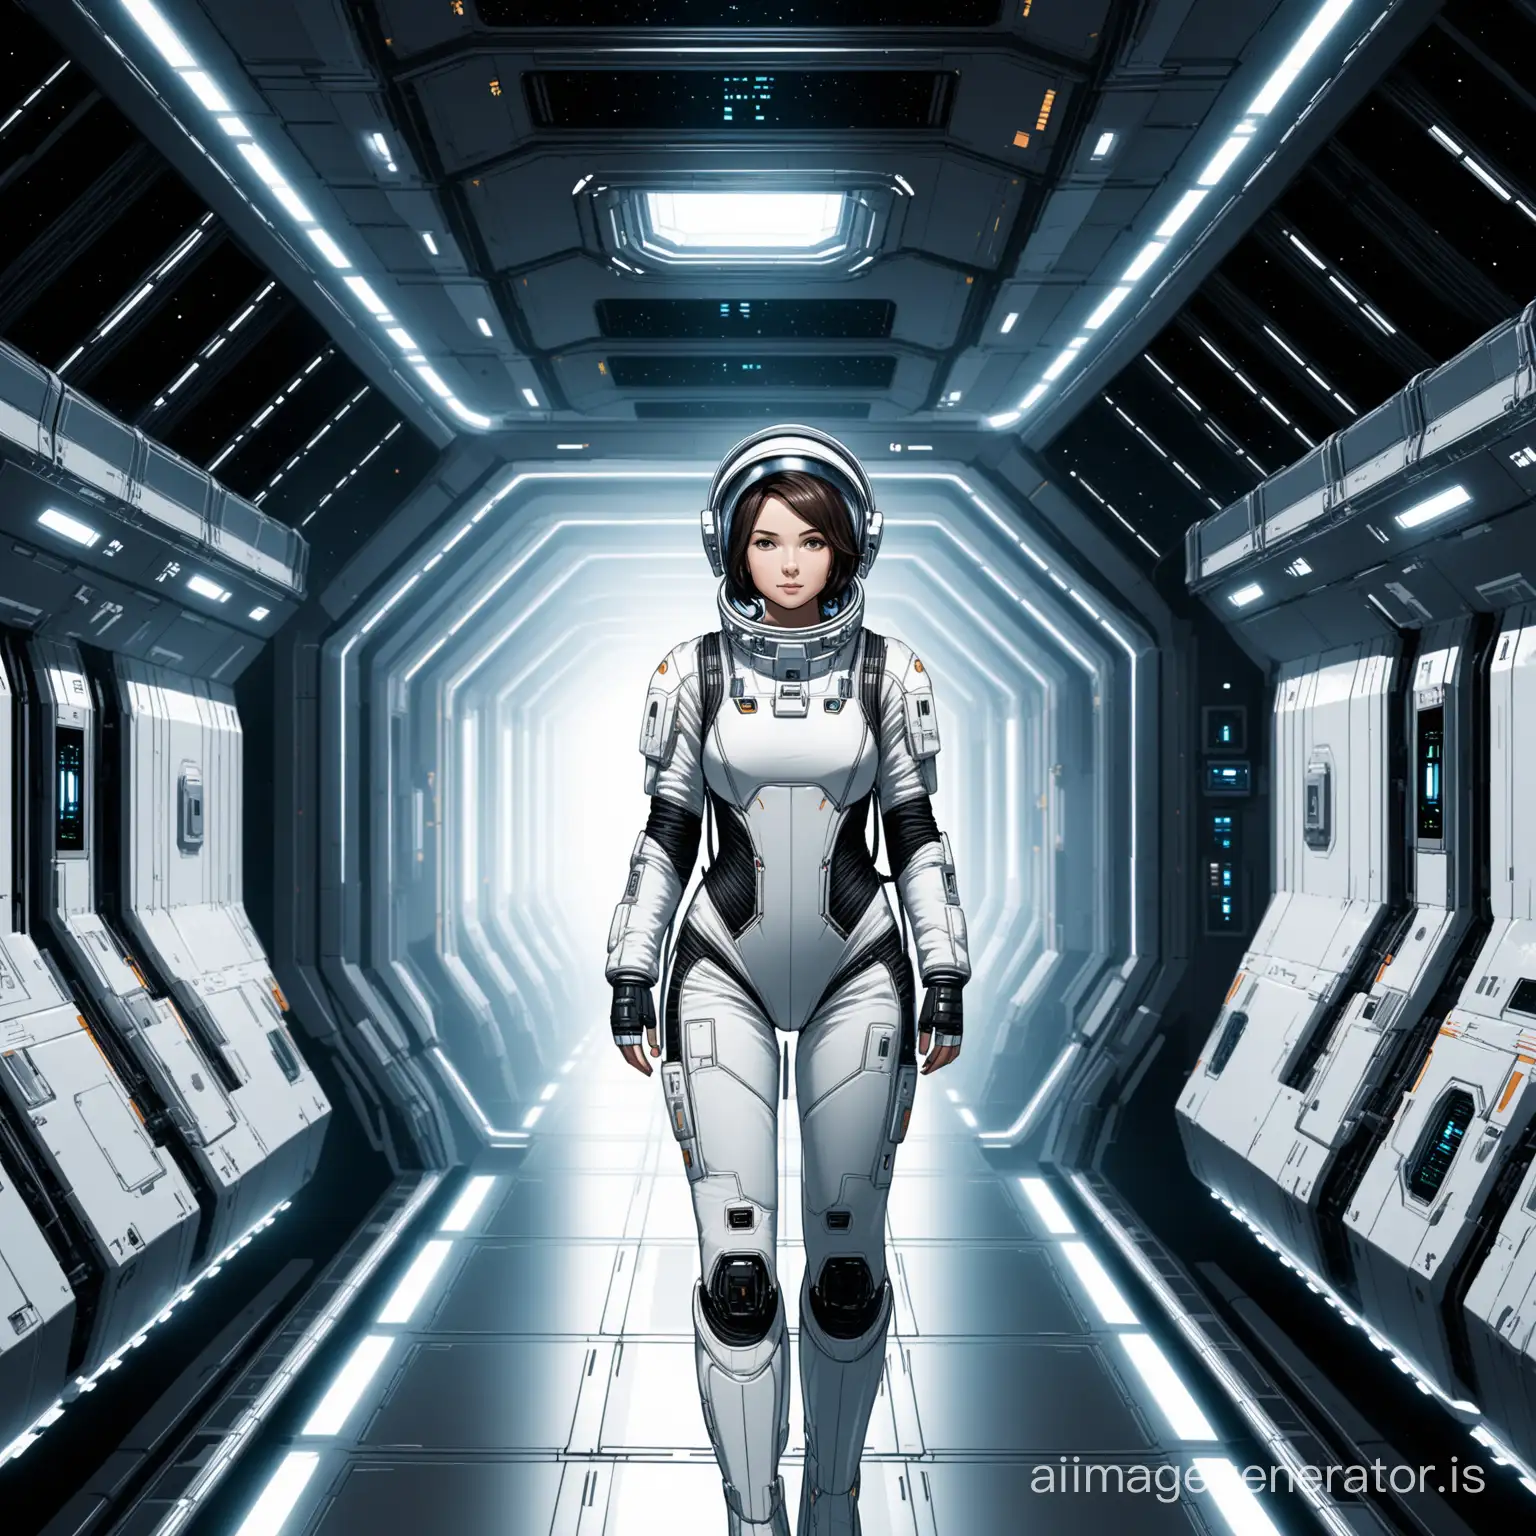 A photorealistic 3d render of a lovely short hair brunette woman in a robotic astronaut space suit with a helmet on her head standing ground level inside a space station hallway. The woman's looks to be in her late twenties. The woman is at the center in depth of the hallway, we can see her bionic boots. She appears to be looking straight ahead. The space station is white with various machinery, equipment and an a closed door visible in the background. The helmet has a visor on the left side. The image has a color palette of white, gray, and black. The overall atmosphere is futuristic and space-themed.